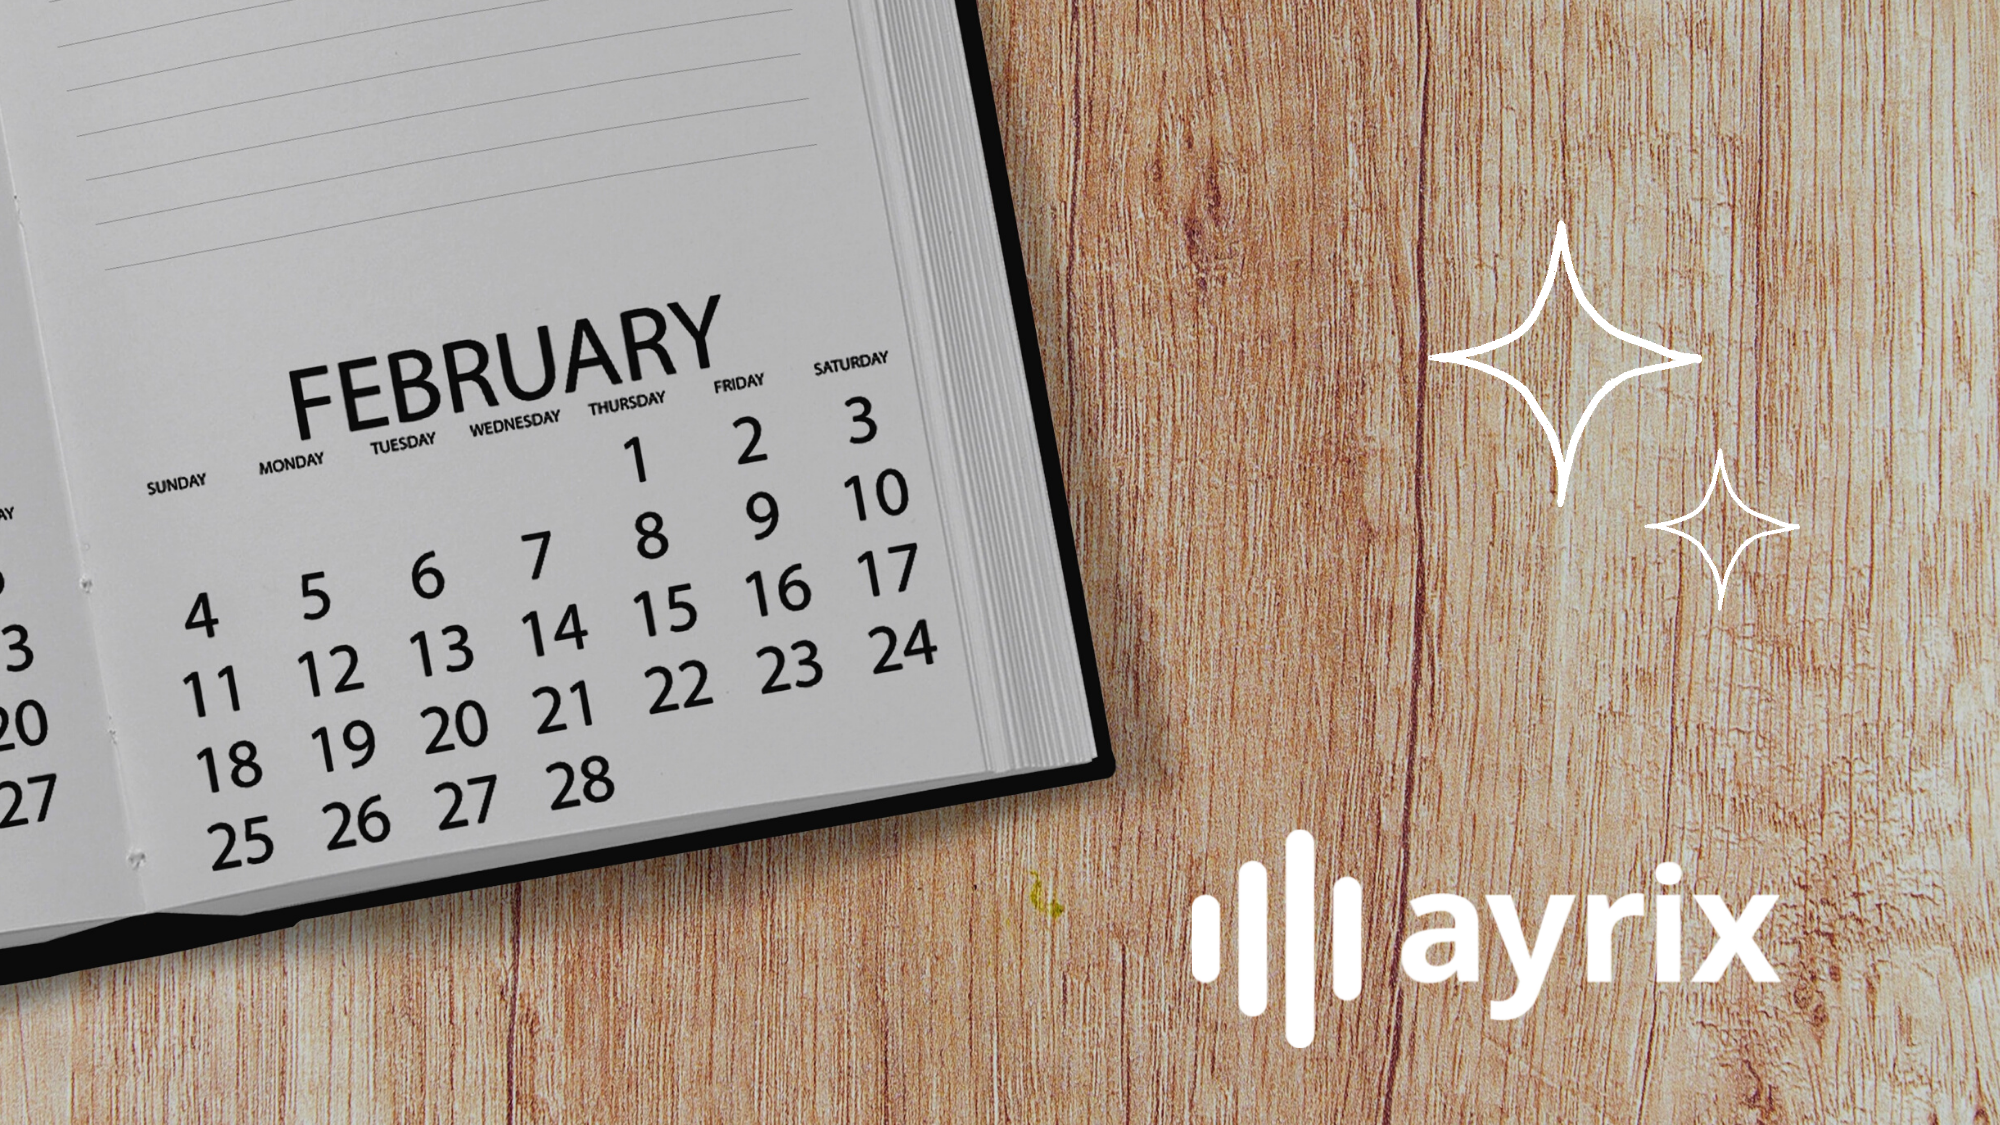 Ayrix Monthly Review February 2022